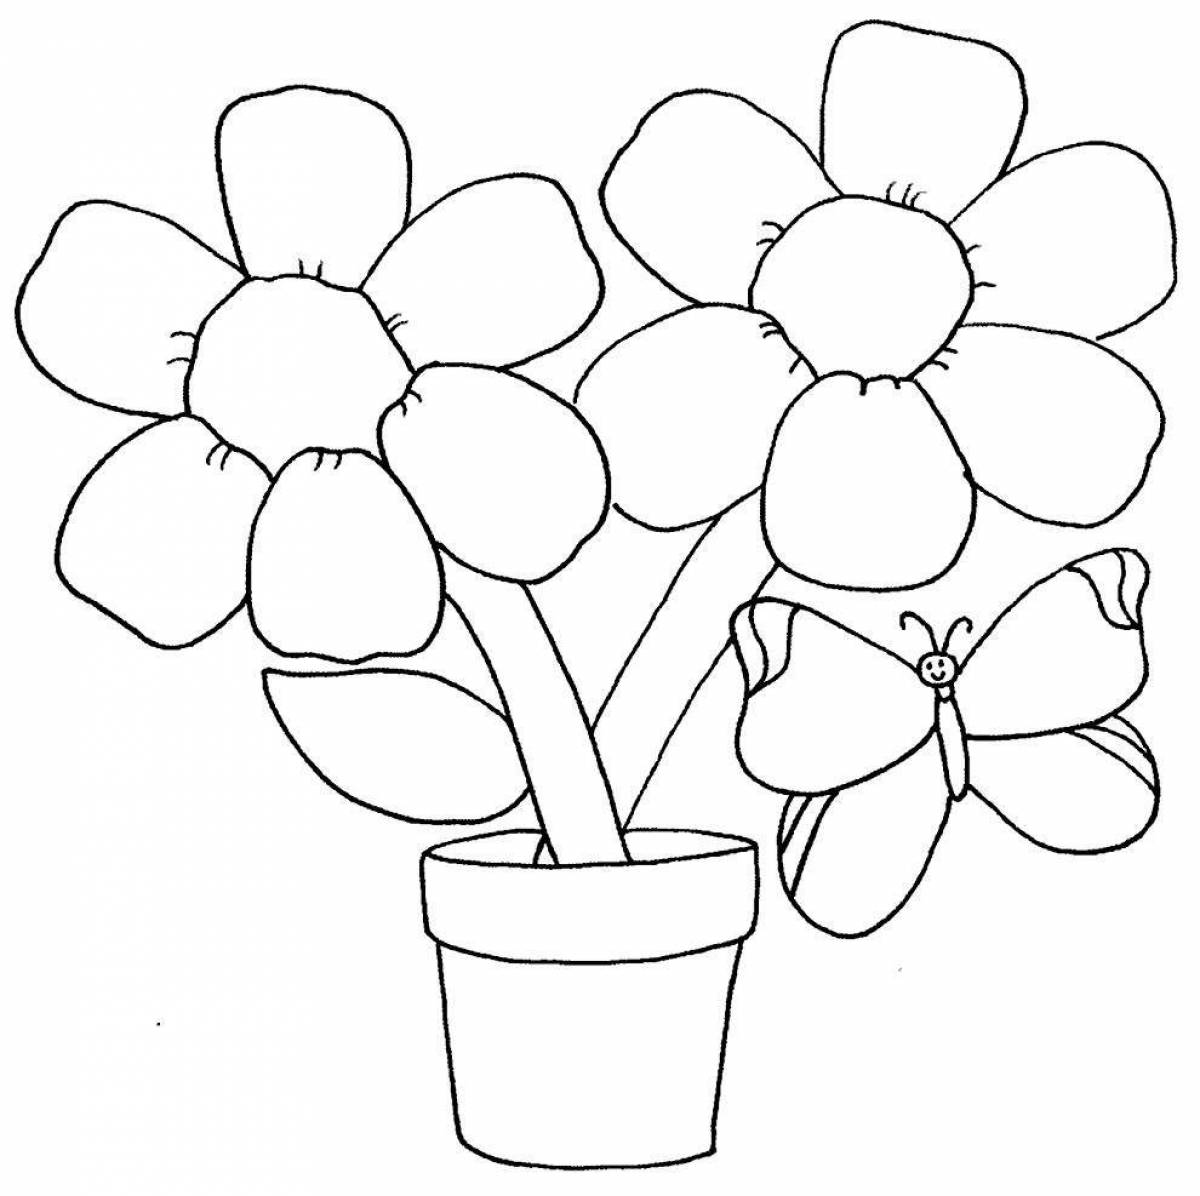 Amazing simple flower coloring book